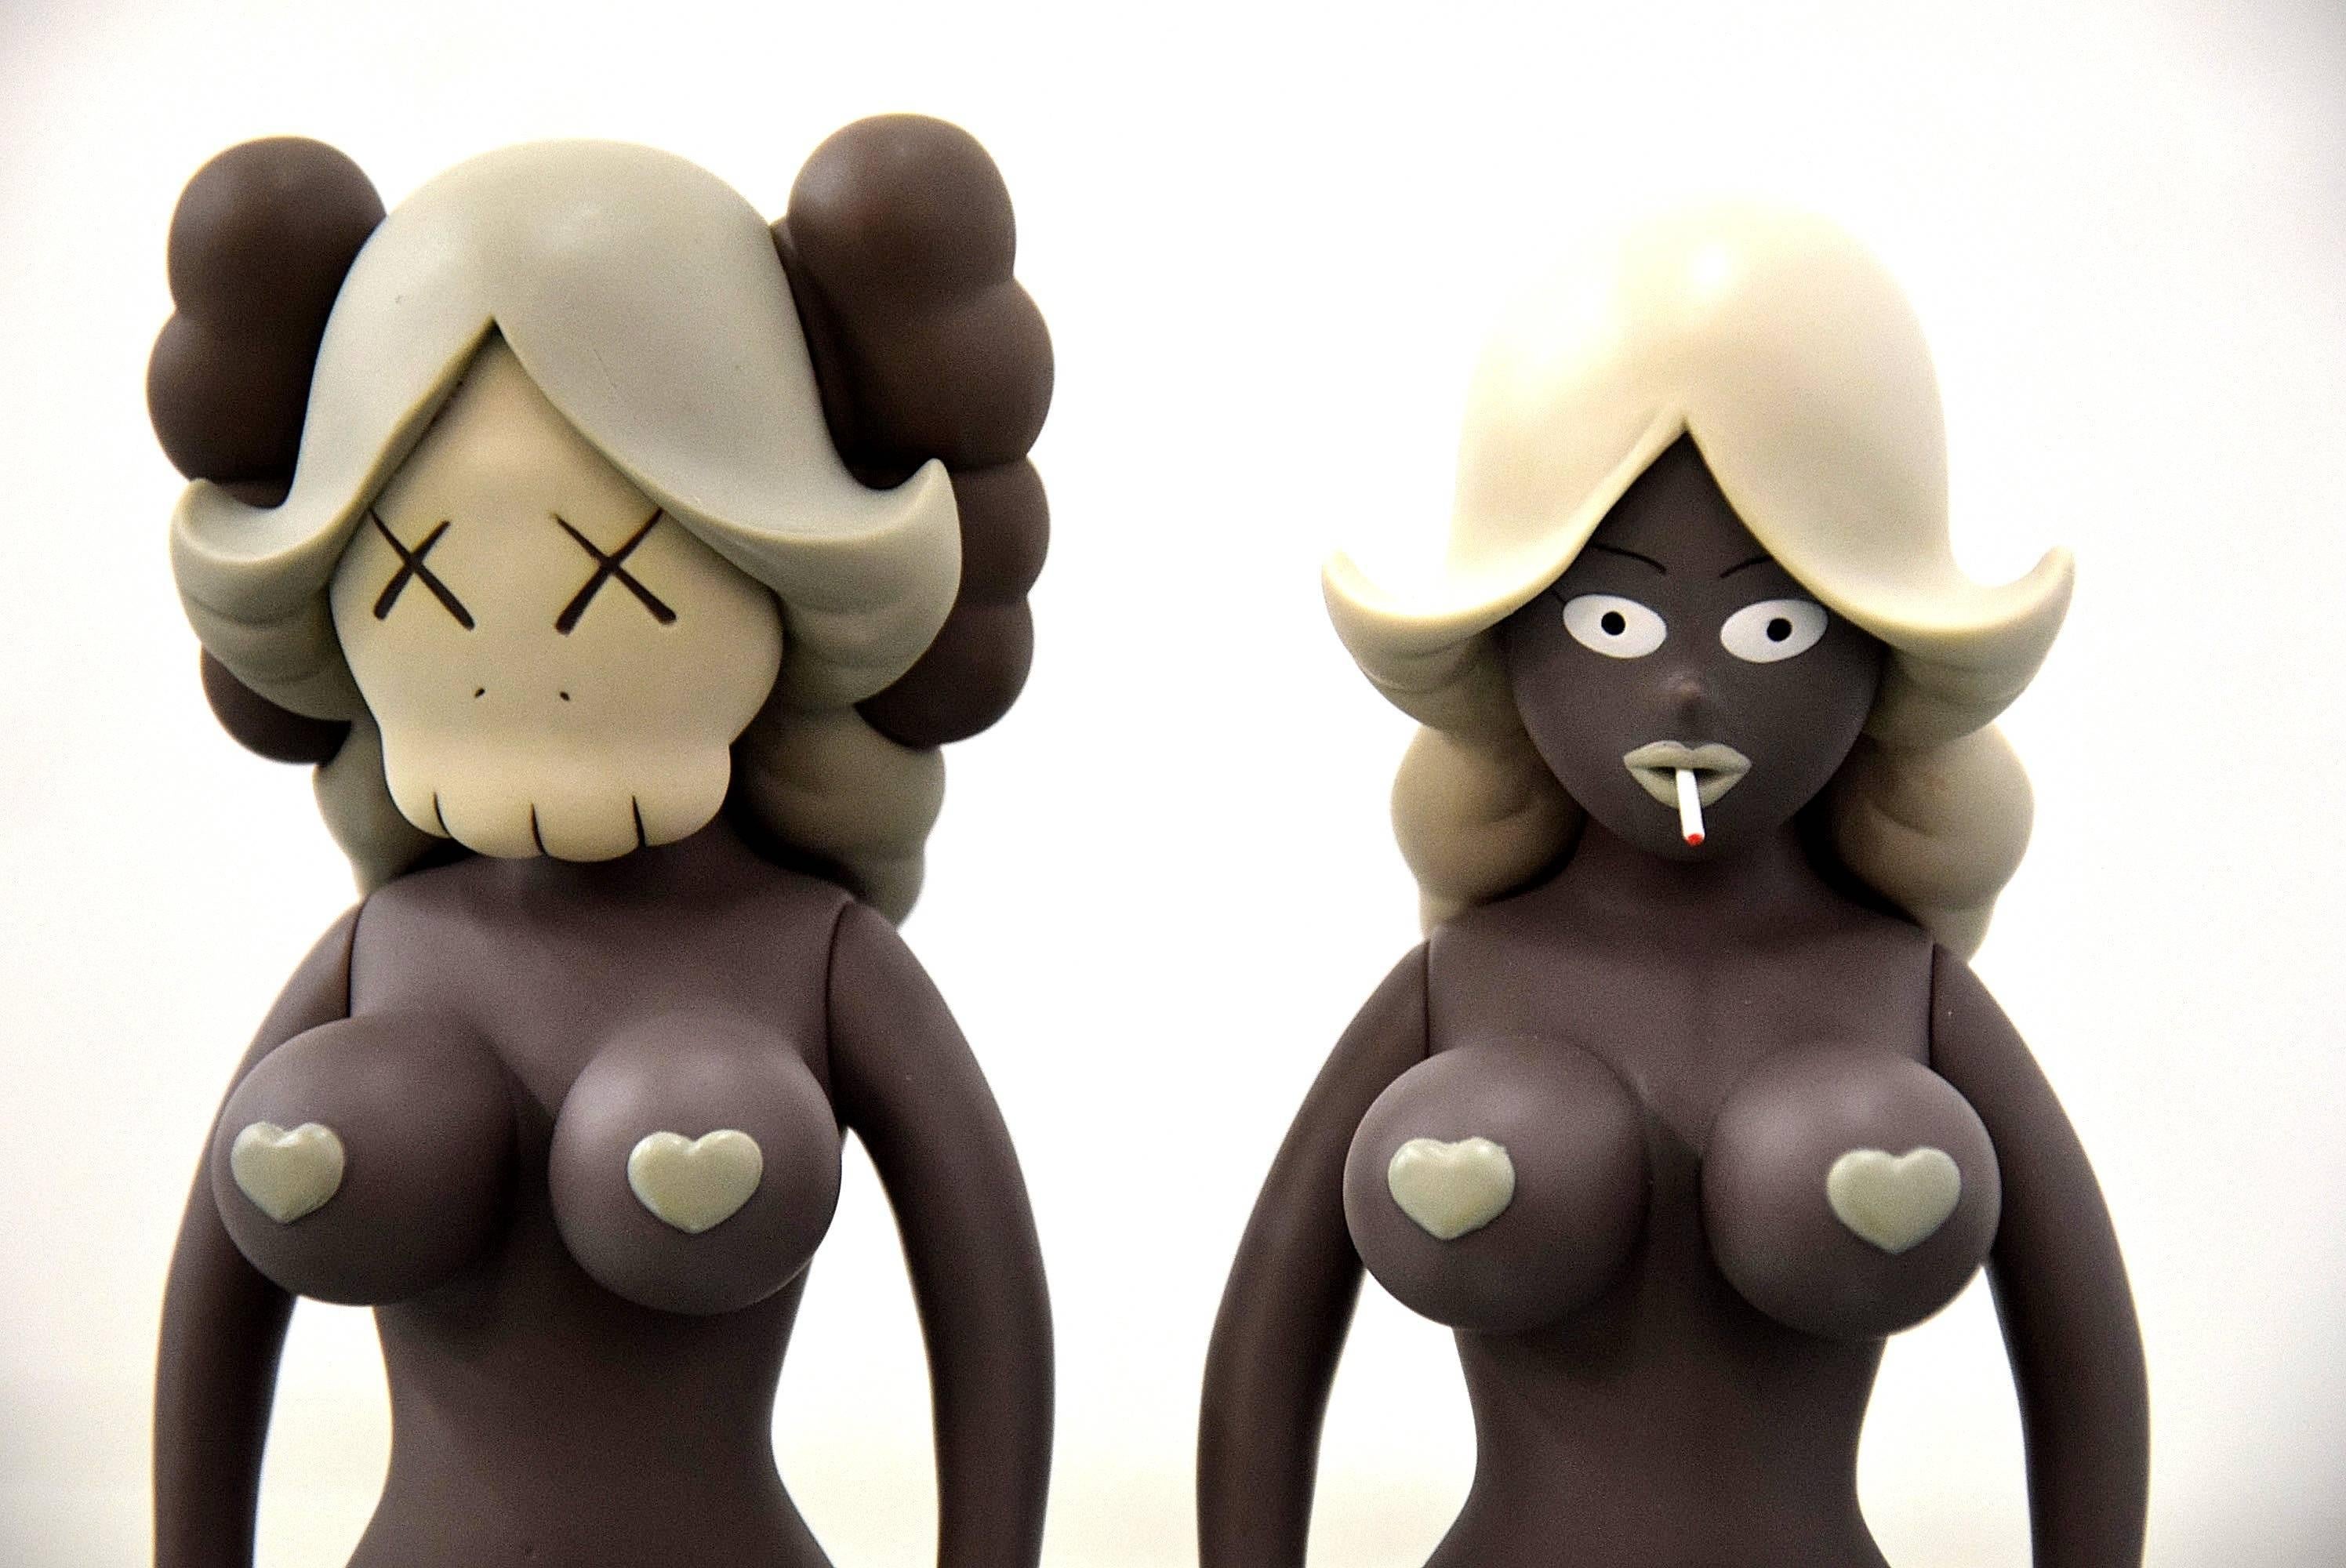 A collaboration between brooklyn-based artist, KAWS and graffiti artist, Todd James (REAS), this set of figures feature the unique stylings of each artist in a neutral, tonal palette.

Twins have never been exposed and have always been stored out